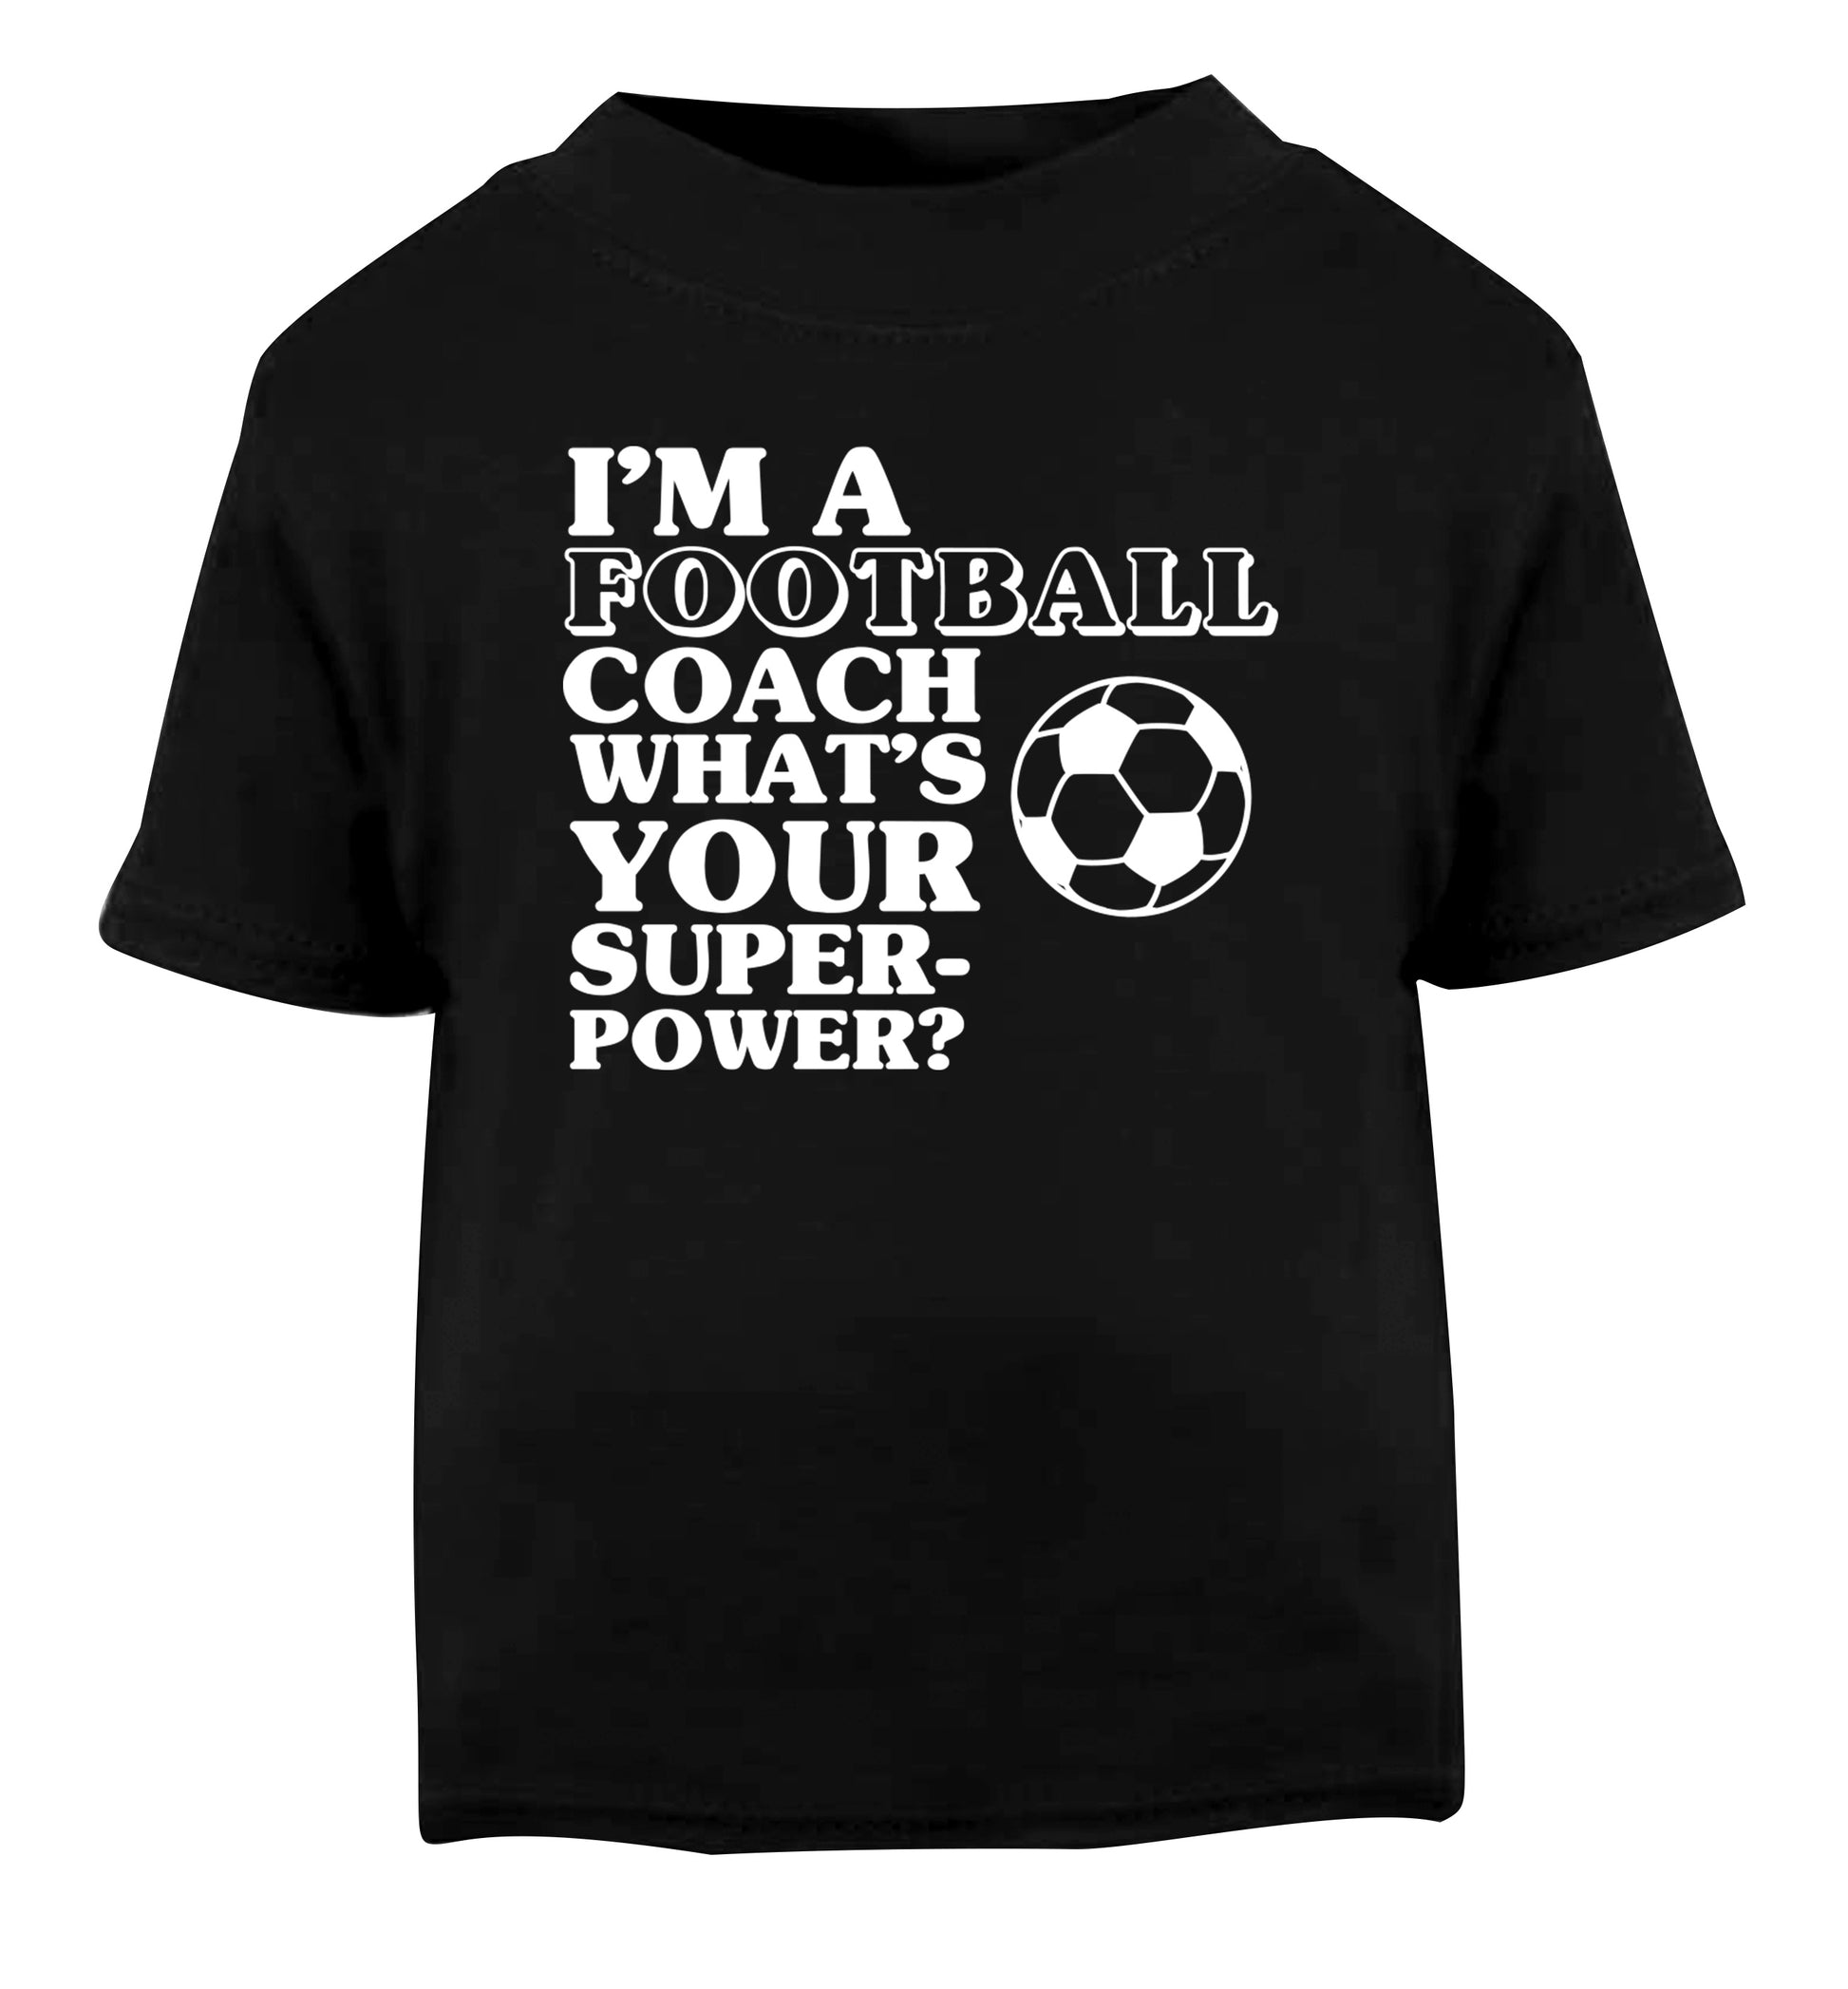 I'm a football coach what's your superpower? Black Baby Toddler Tshirt 2 years